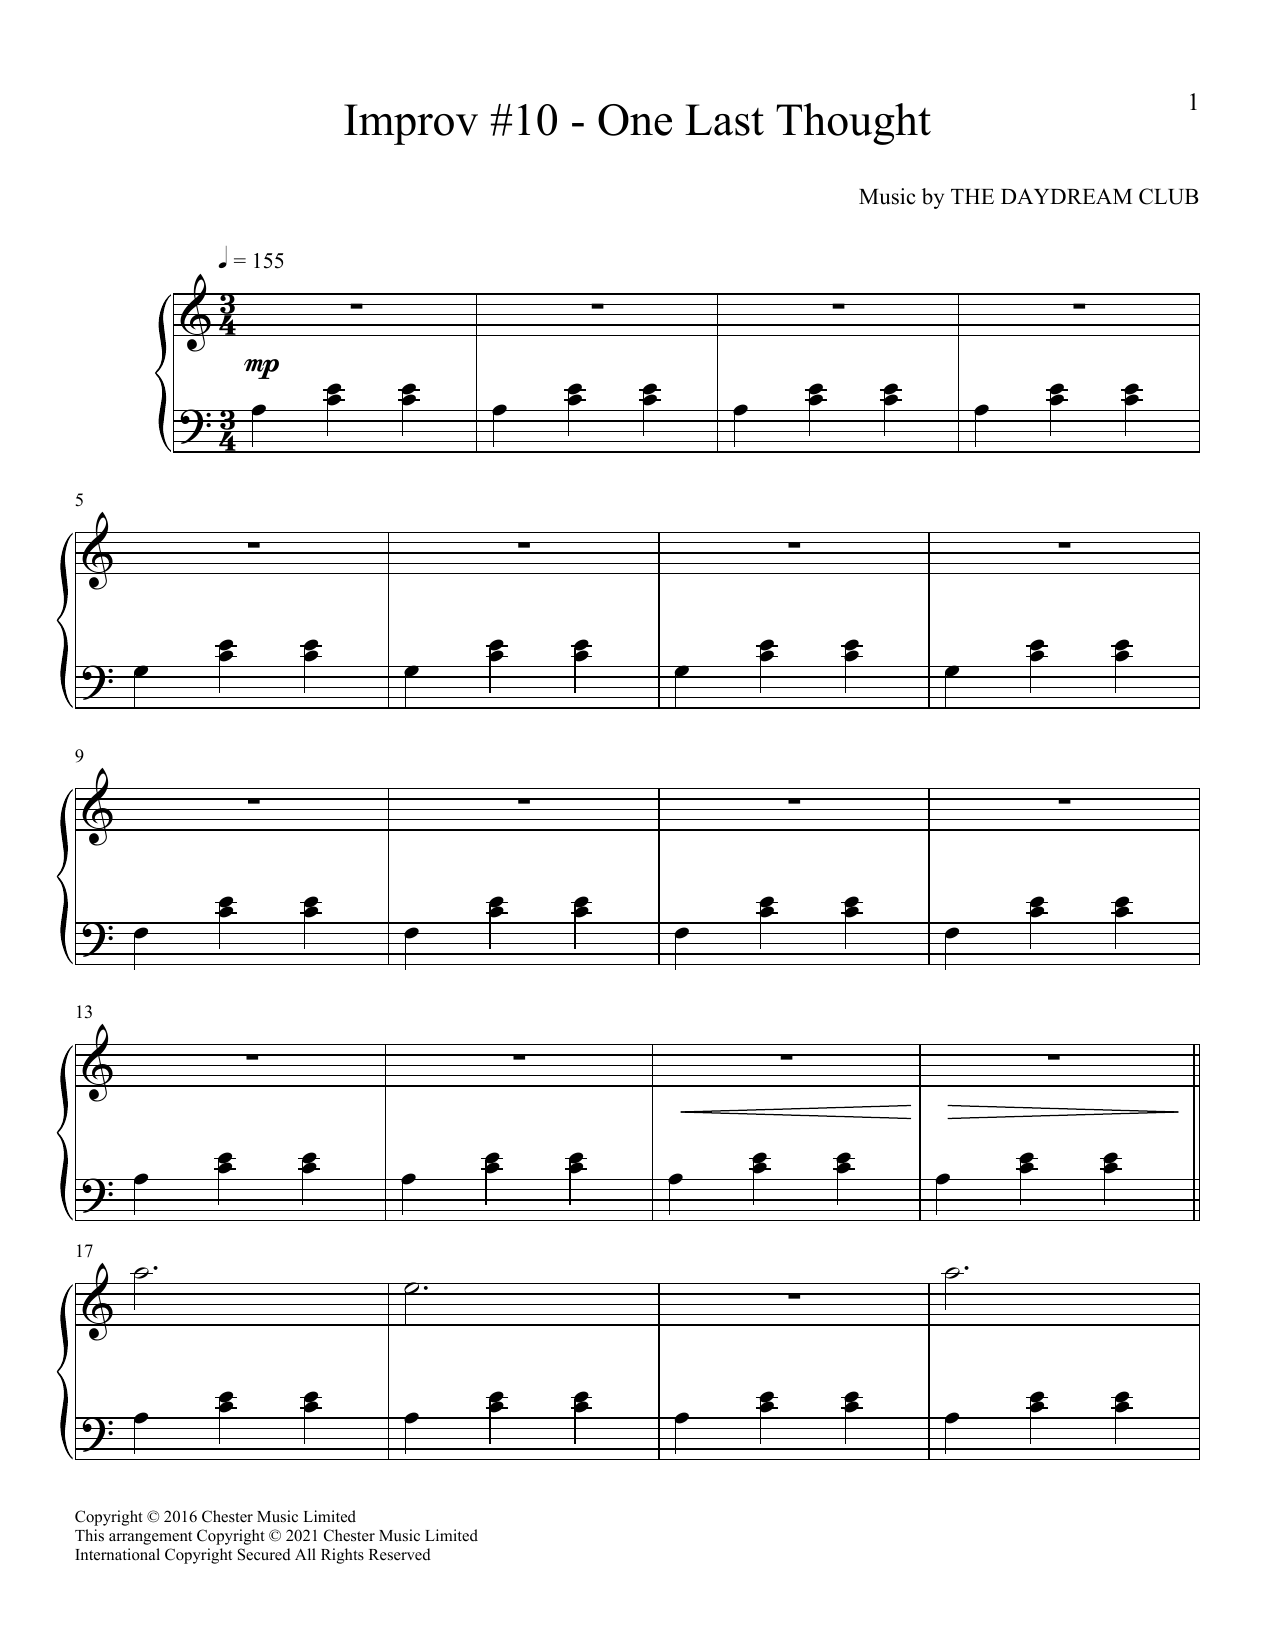 Download The Daydream Club Improv #10 - One Last Thought Sheet Music